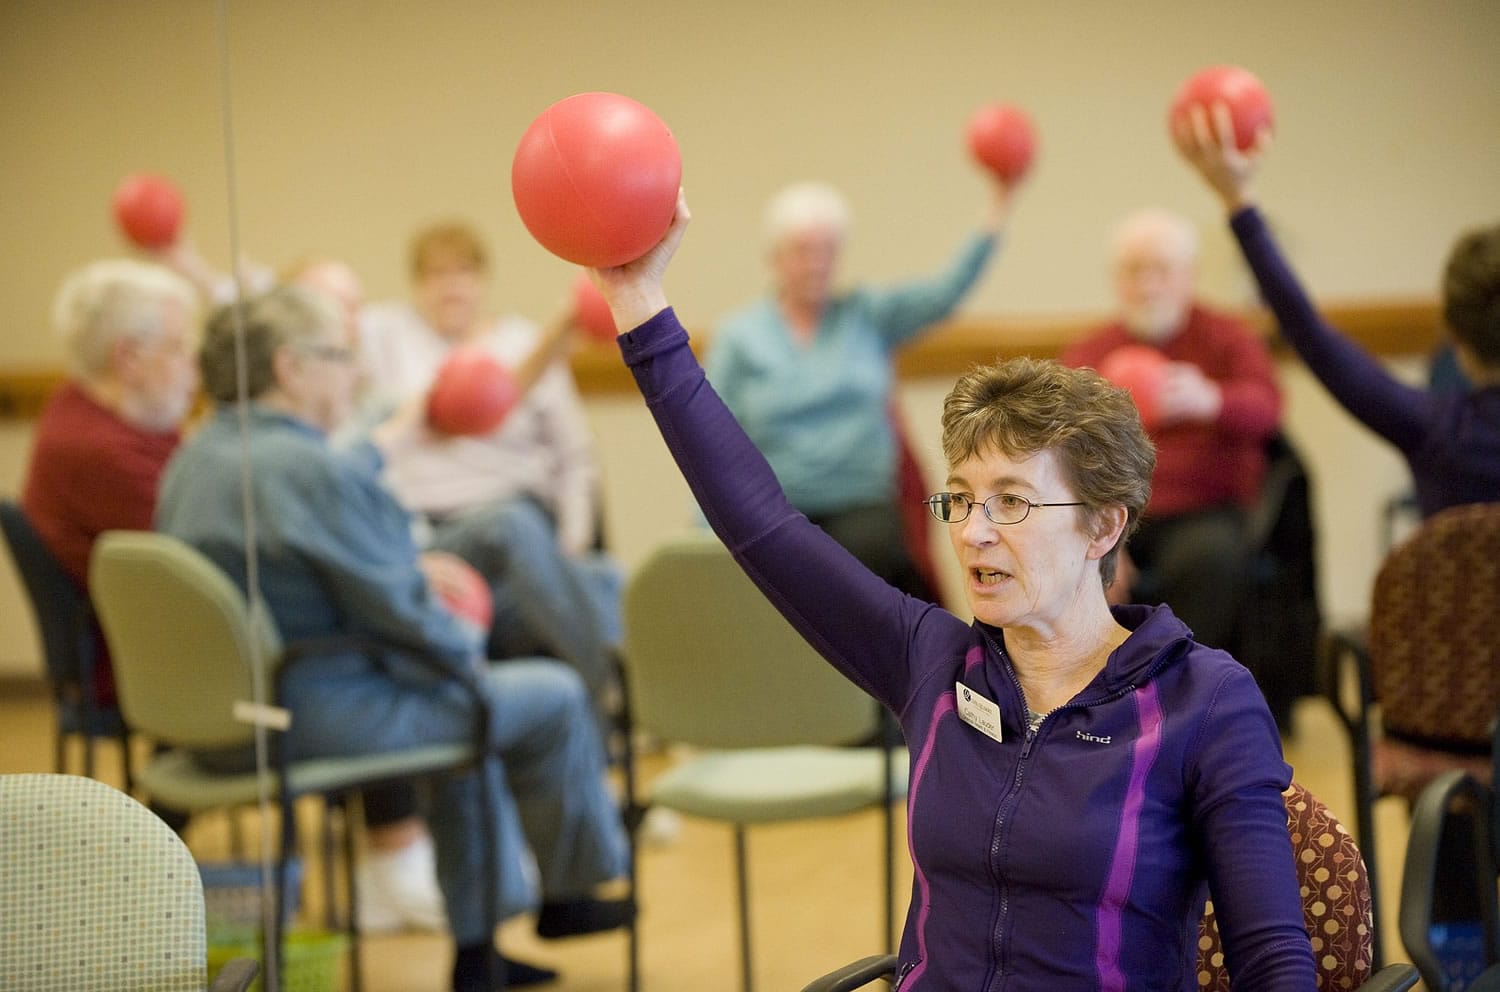 Cathy Lauder leads an exercise class for people with Parkinson's disease at Vancouver's The Quarry Senior Living.